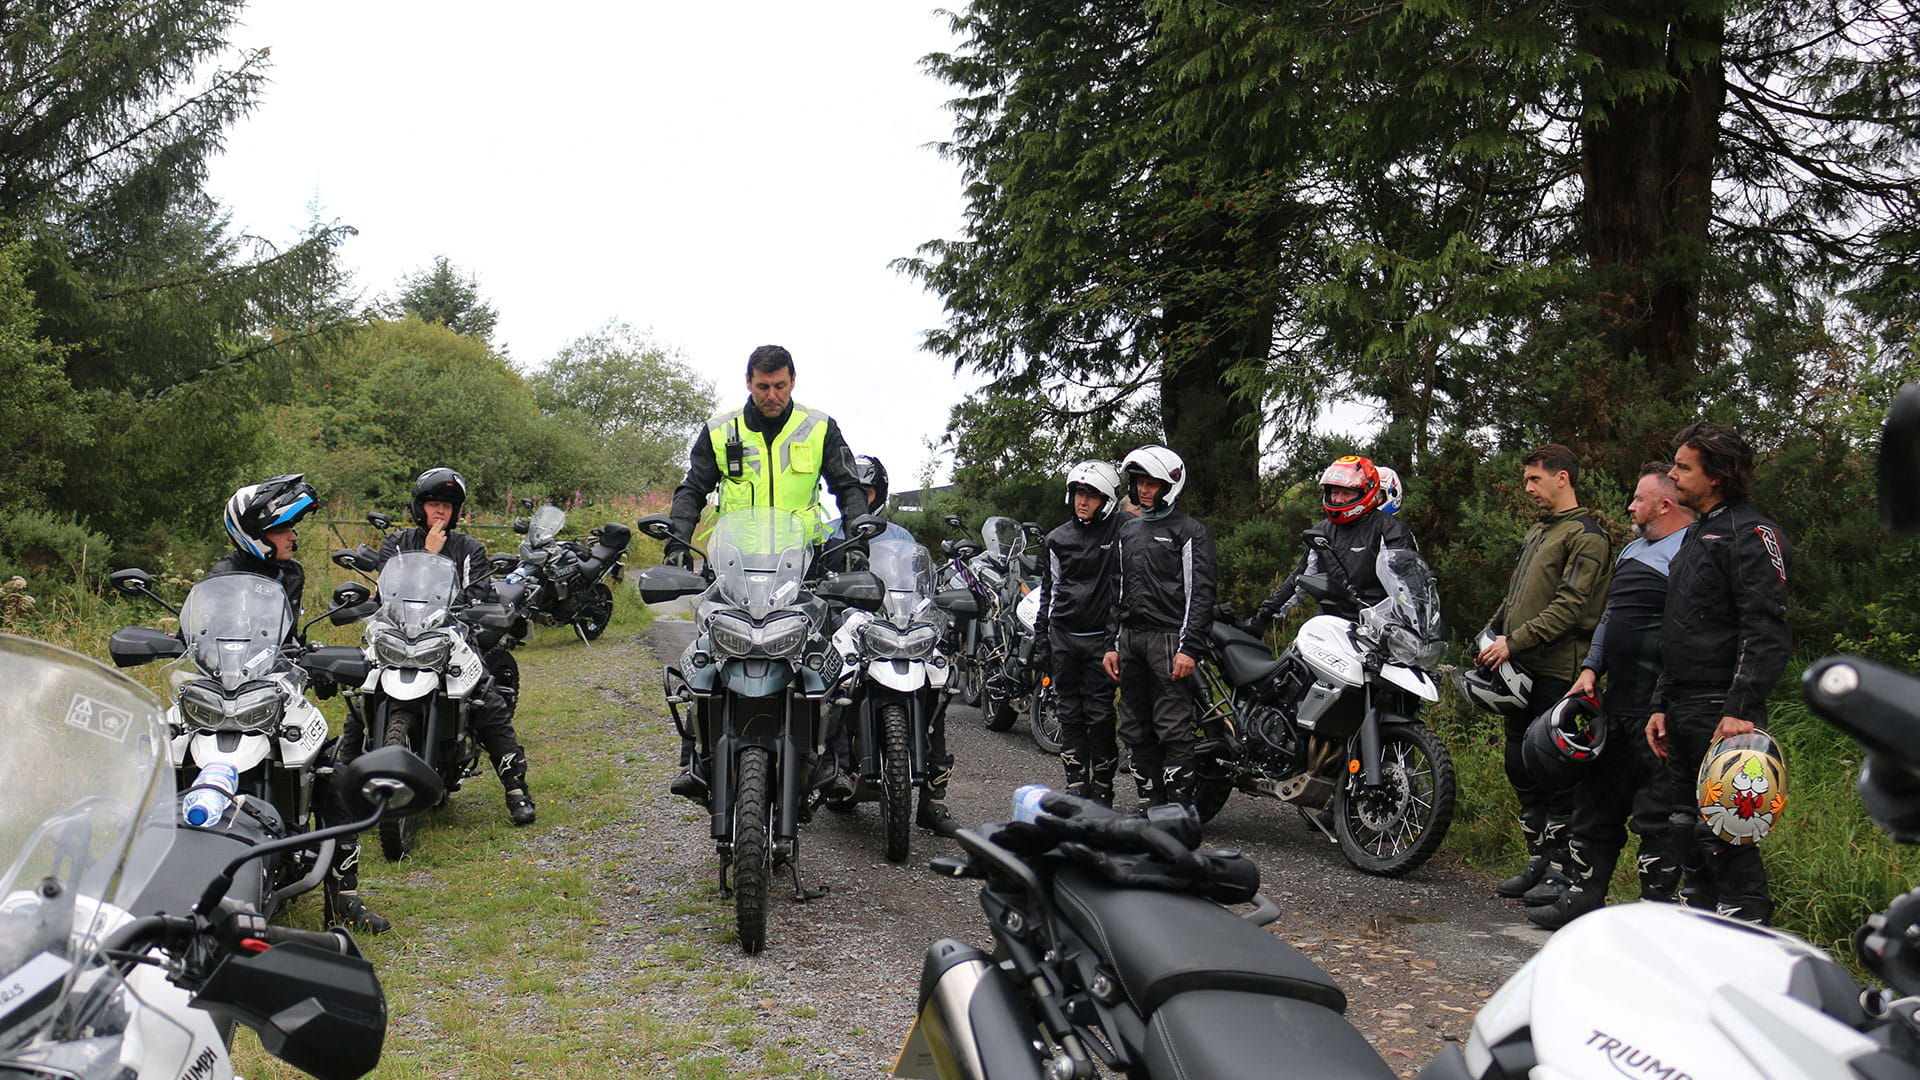 Group shot of the Triumph Adventure training course